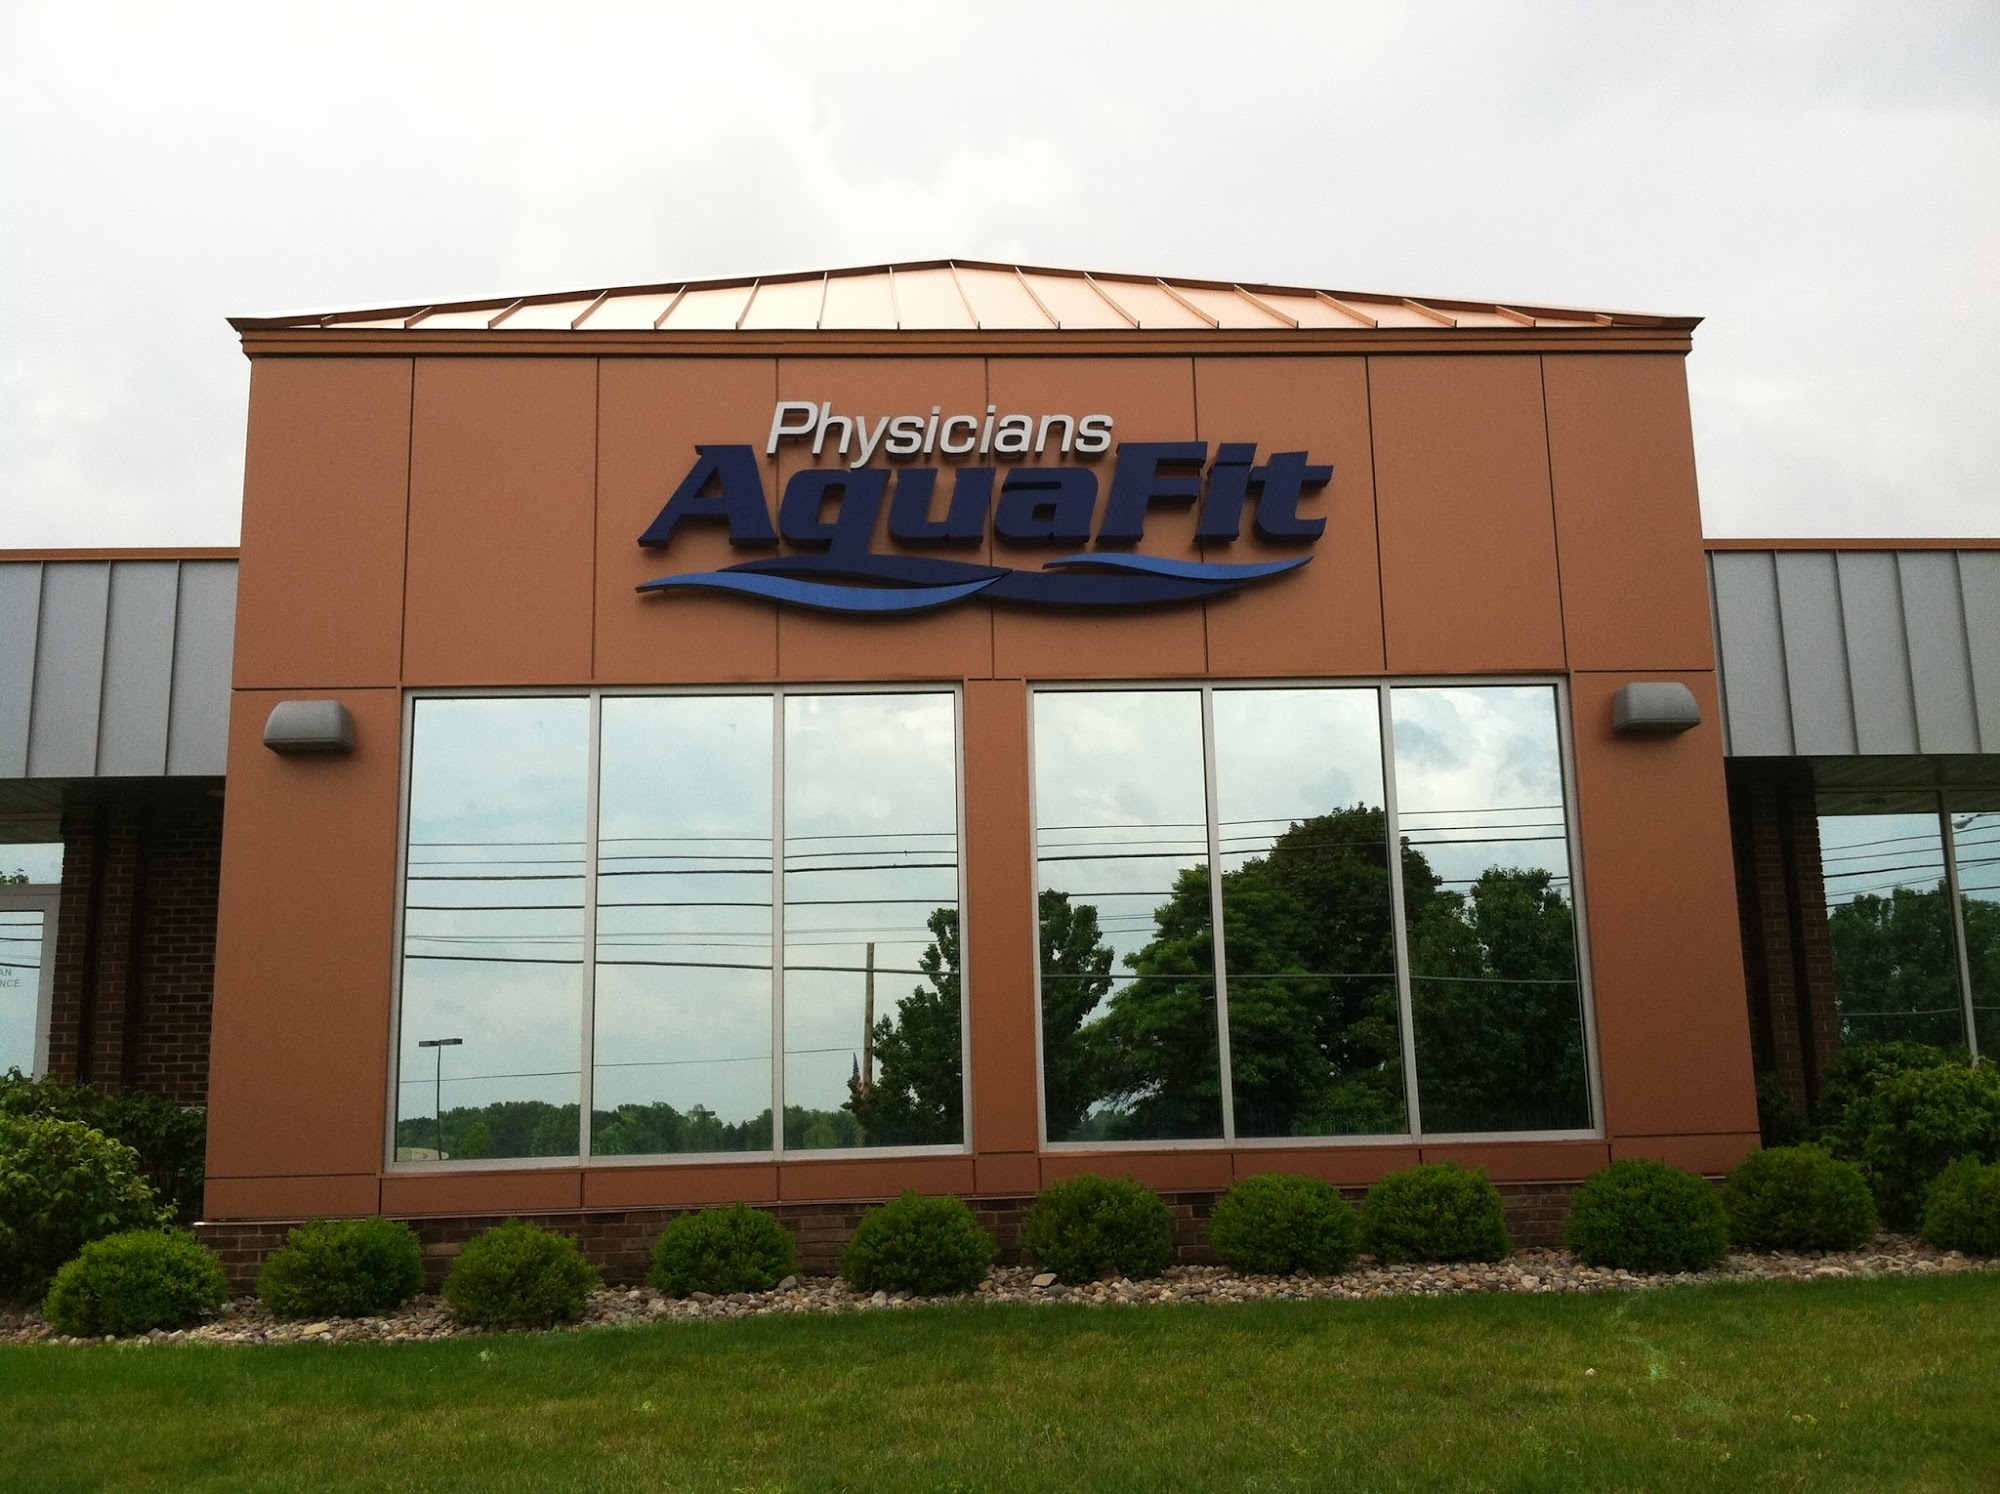 Physicians AquaFit Physical Therapy